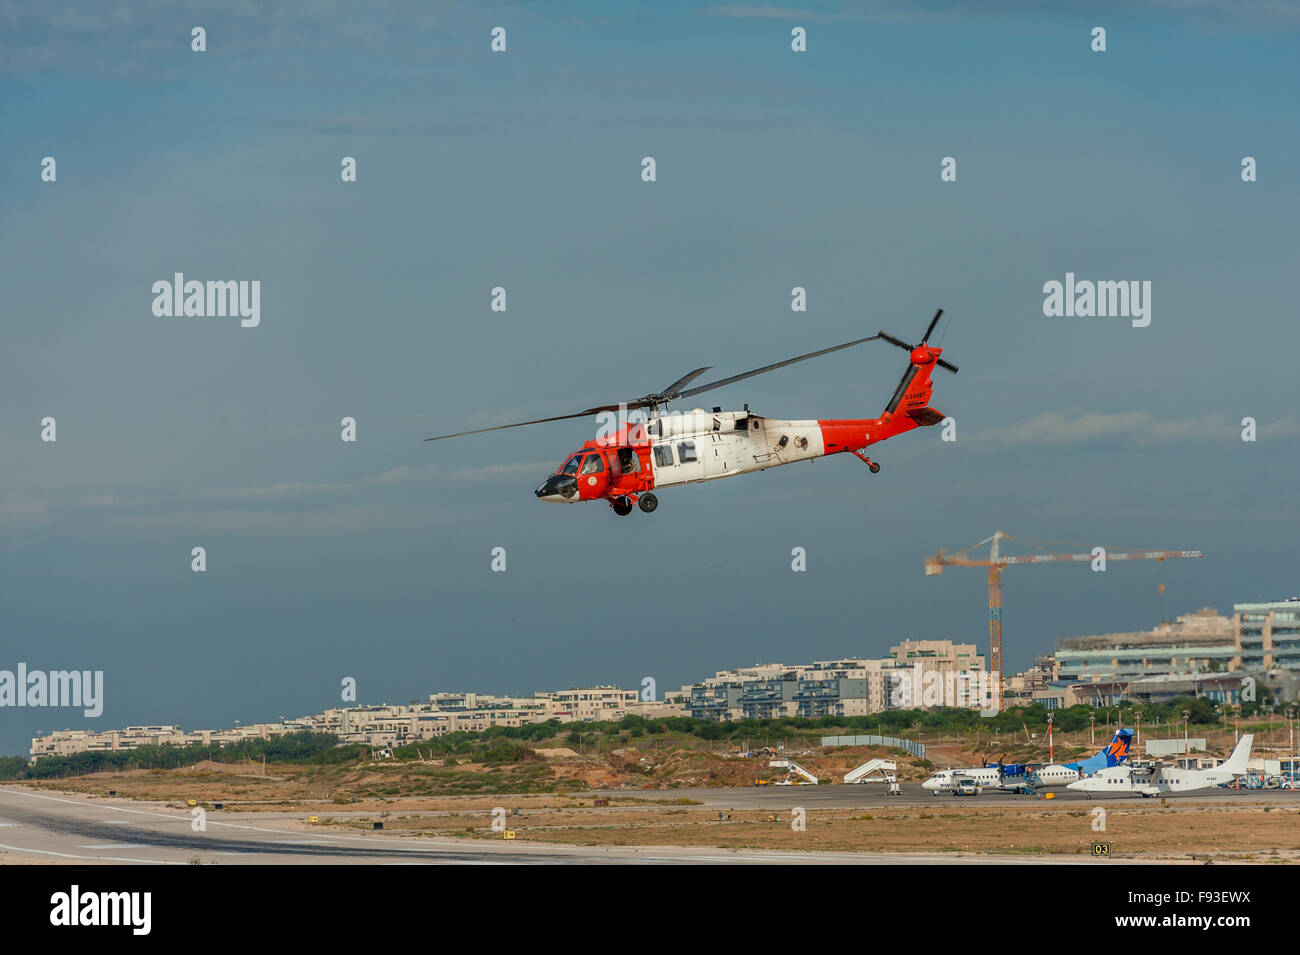 Israel, Tel Aviv, helicopter taking of at Sde Dov airport Stock Photo